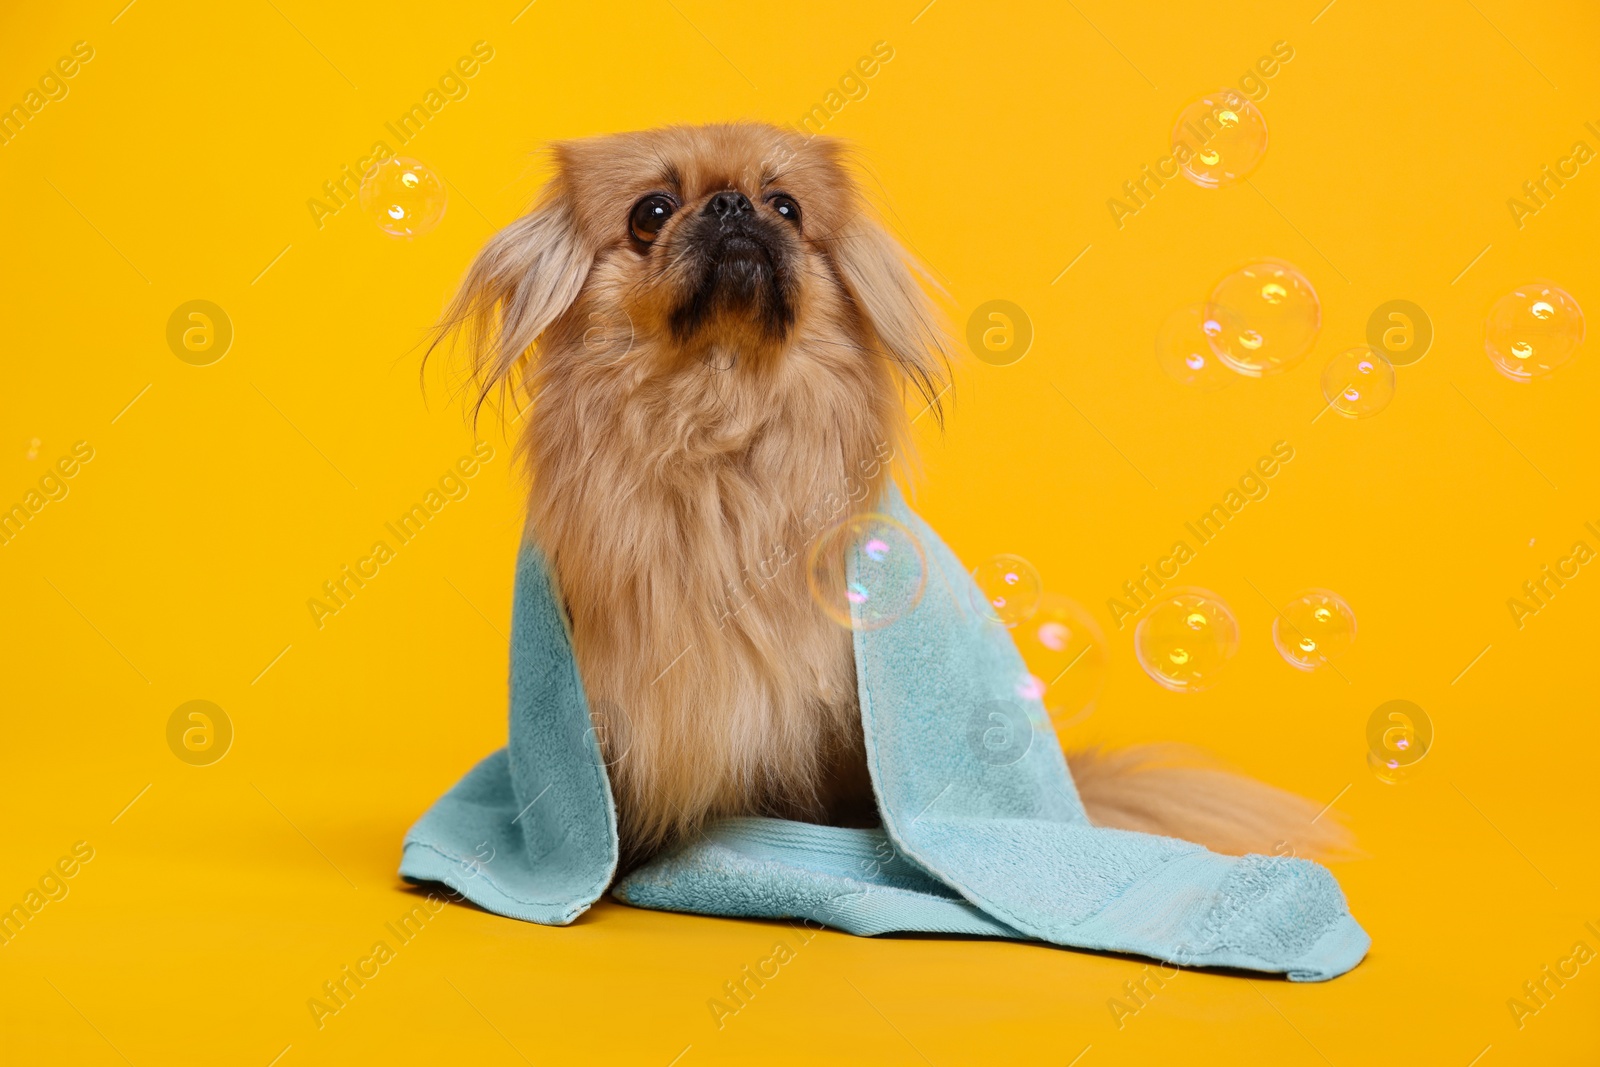 Photo of Cute Pekingese dog wrapped in towel and bubbles on orange background. Pet hygiene